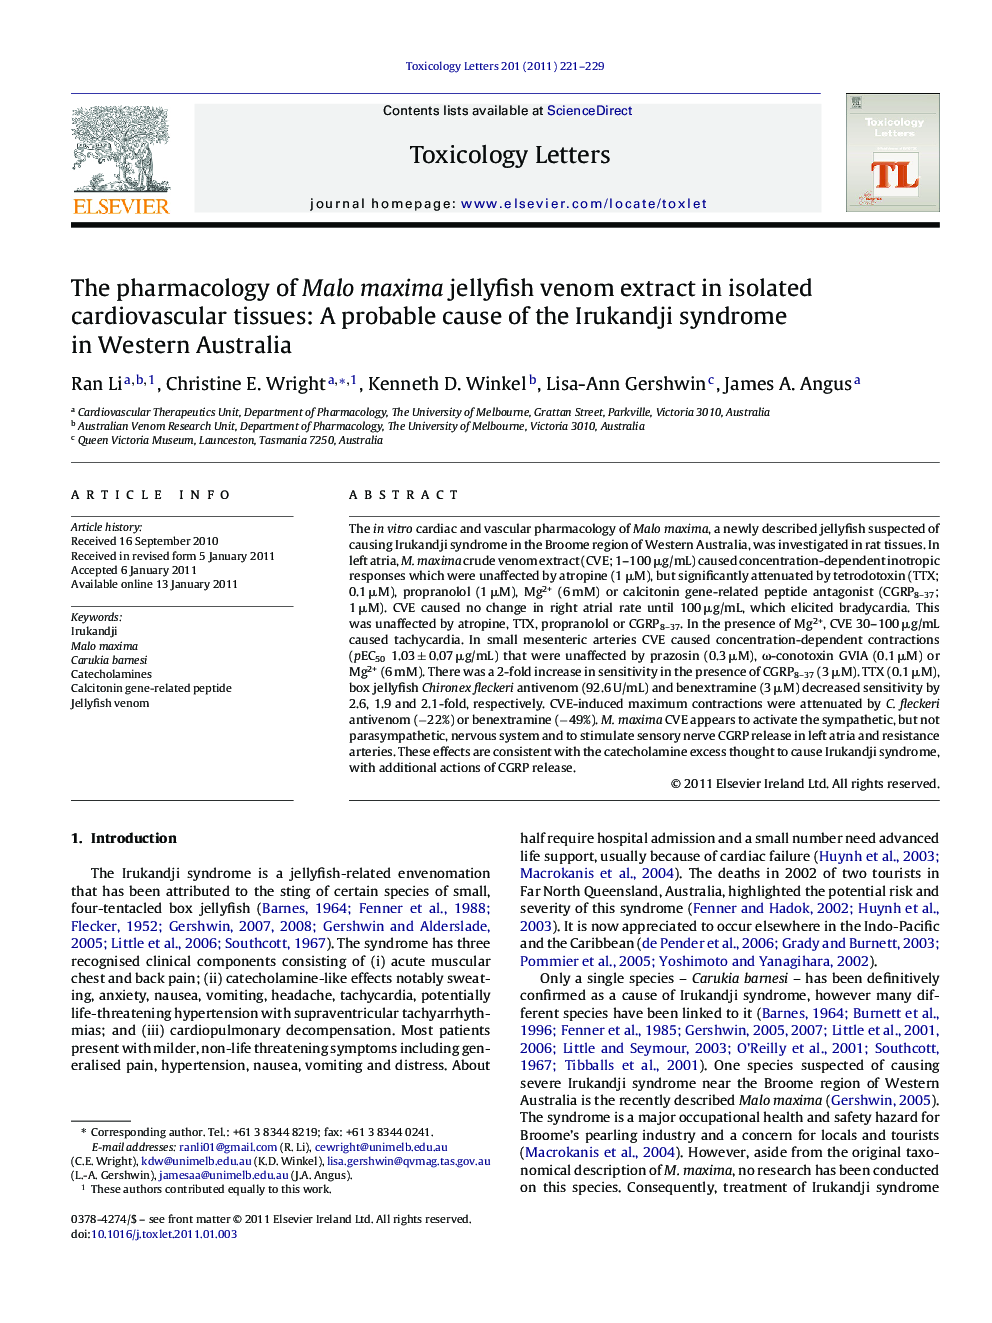 The pharmacology of Malo maxima jellyfish venom extract in isolated cardiovascular tissues: A probable cause of the Irukandji syndrome in Western Australia